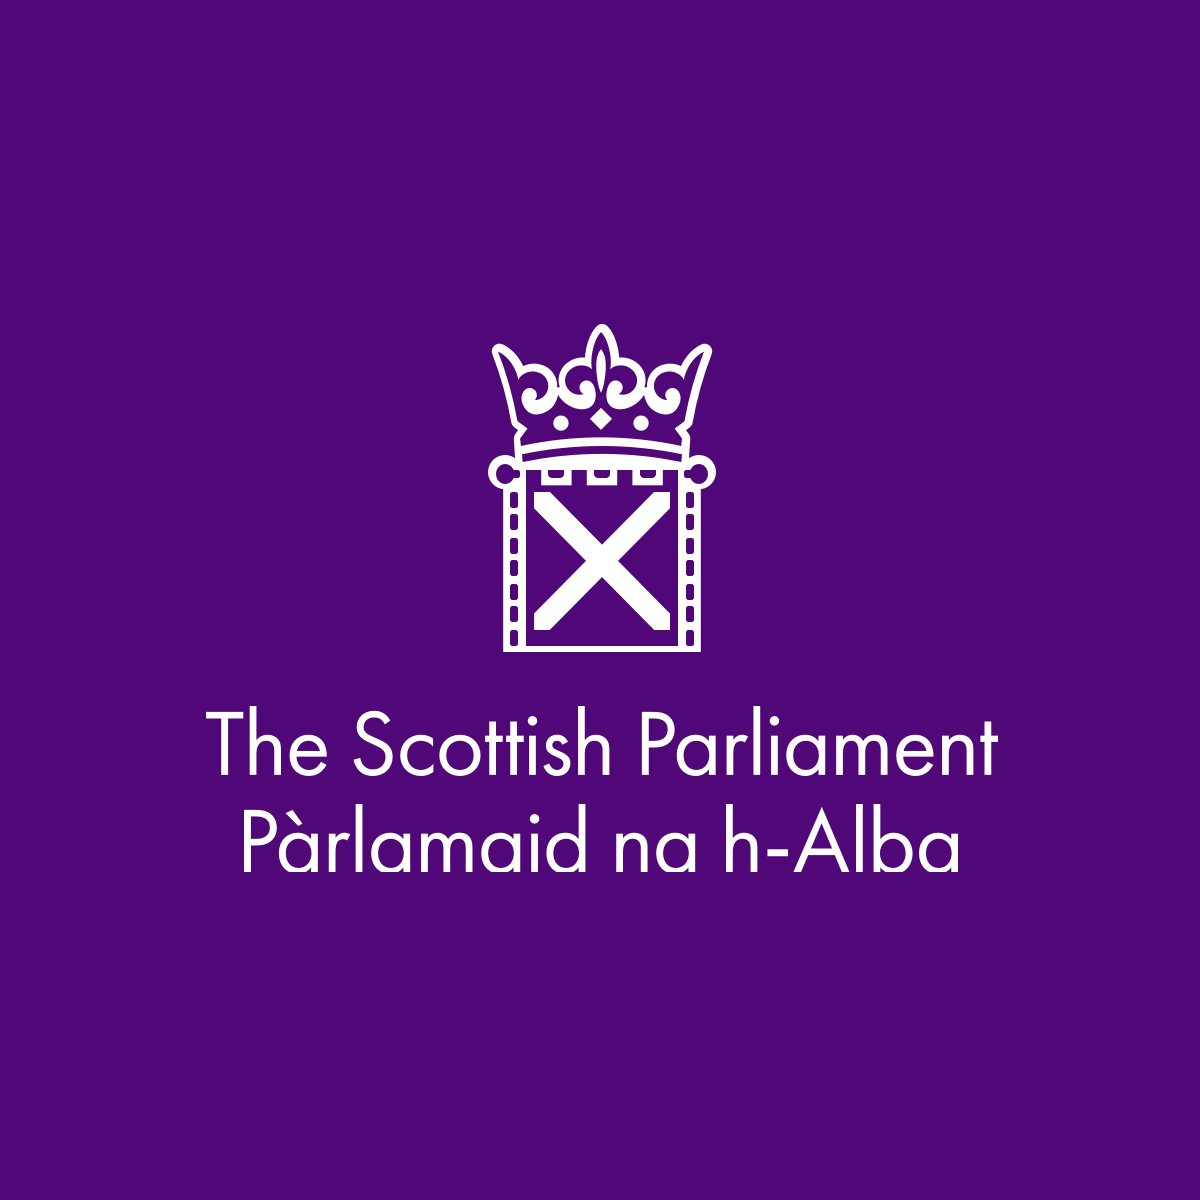 .@Miles4Lothian, MSP for Lothian, has proposed a member’s bill to @ScotParl to give everyone in Scotland with a terminal illness a legal right to palliative care. Anyone from the Scotland mesothelioma community wishing to support this change can do so at parliament.scot/palliative-car…